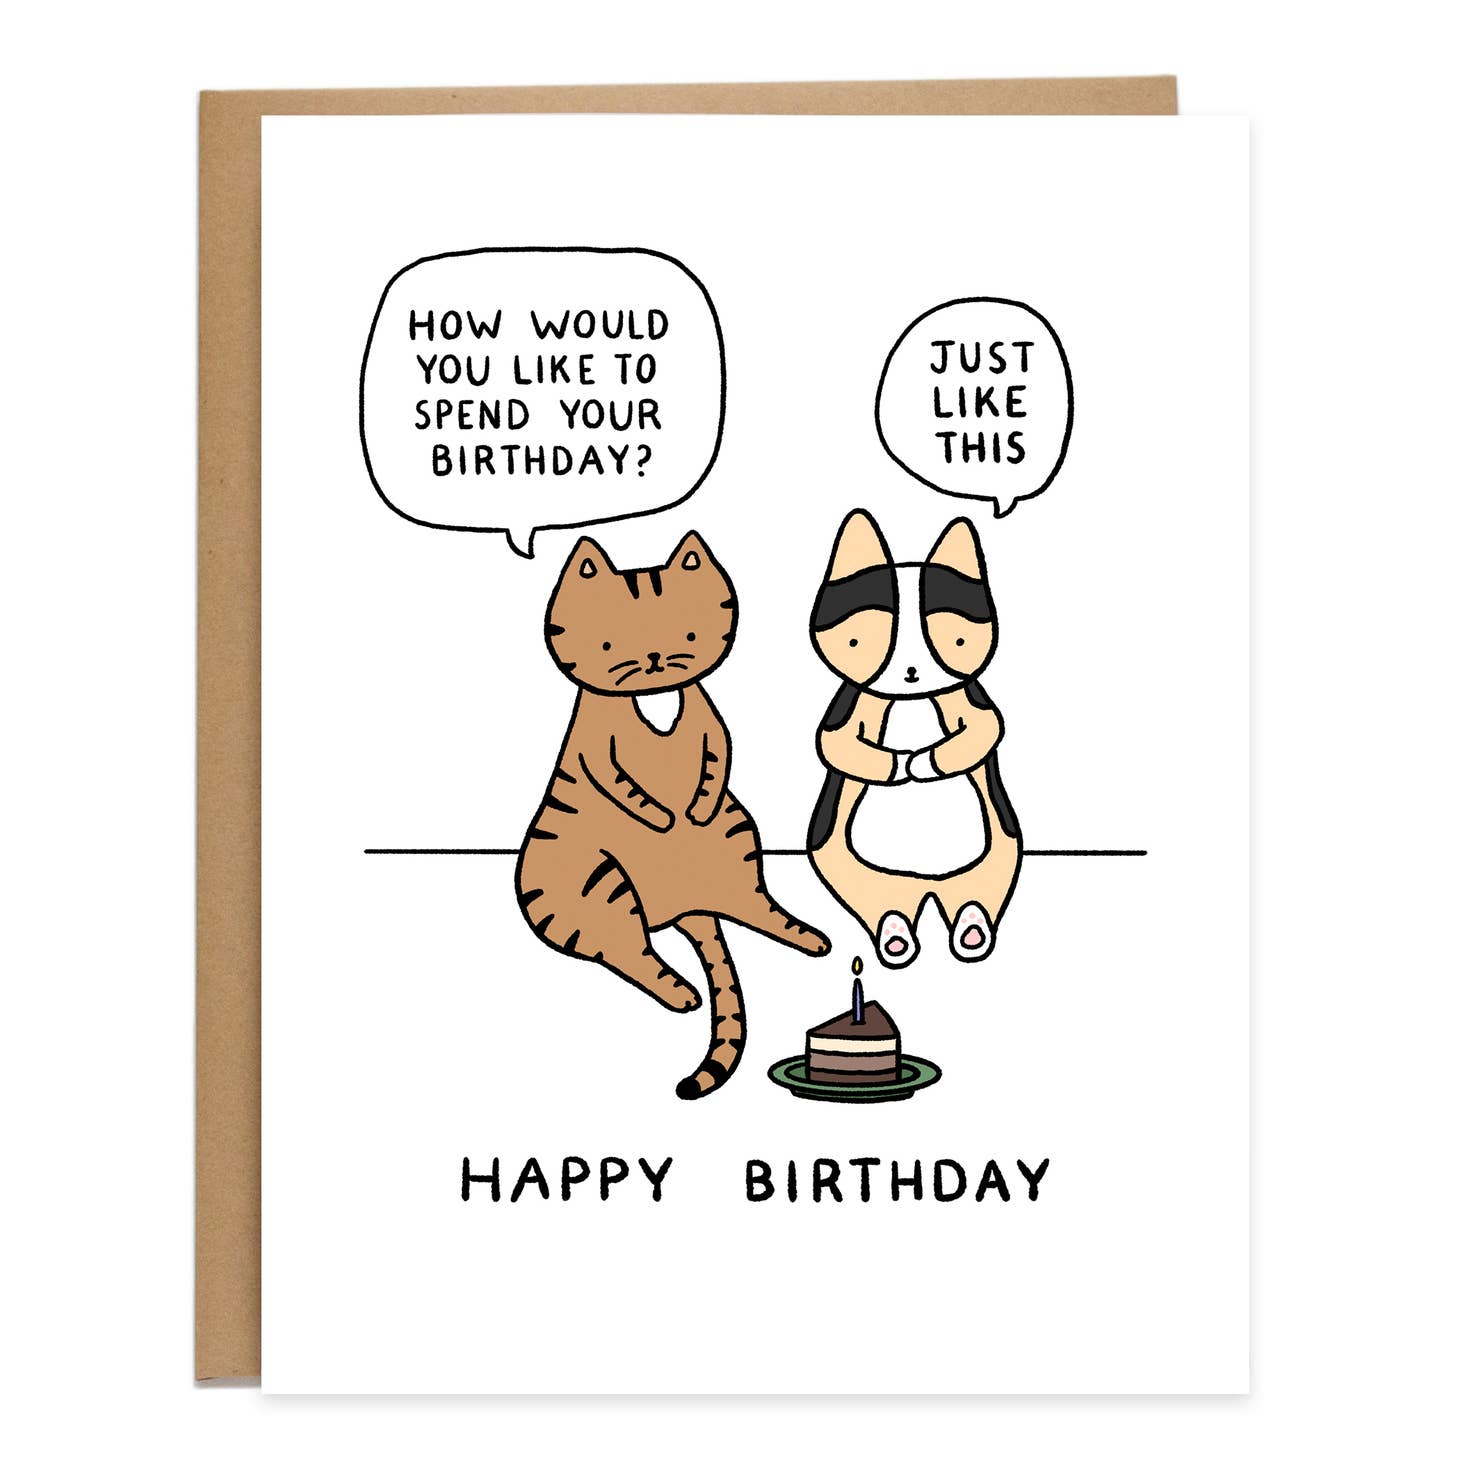 White background with image of tan, black and white corgi and a brown cat with black stripes sitting and looking at a piece of brown and white cake with a candle. Black text for cat says “How would you like to spend your birthday?” and corgi says “Just like this” with “Happy Birthday” below. Kraft envelope included.